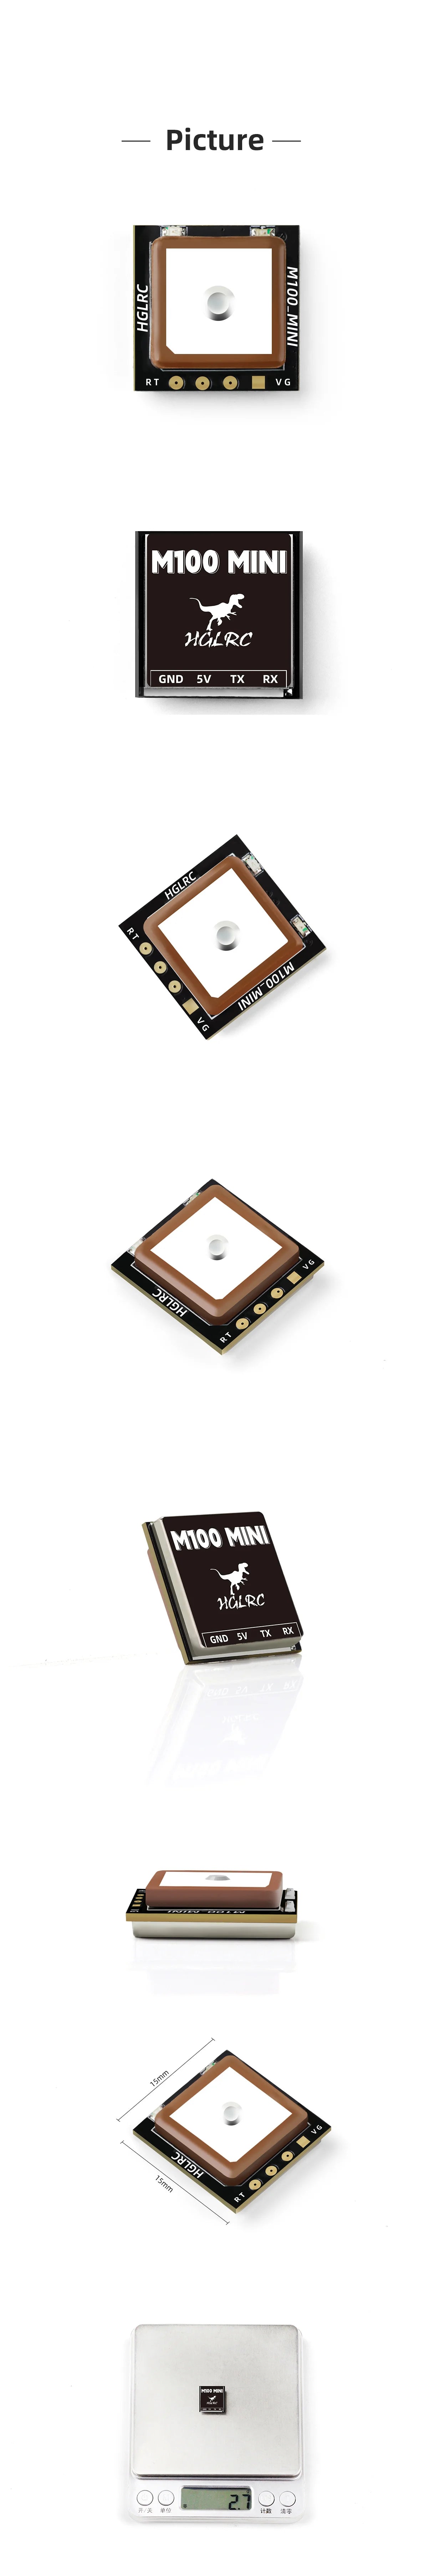 HGLRC M100 MINI GPS, 10th generation UBLOX chip design is fast and accurate . using the new 10